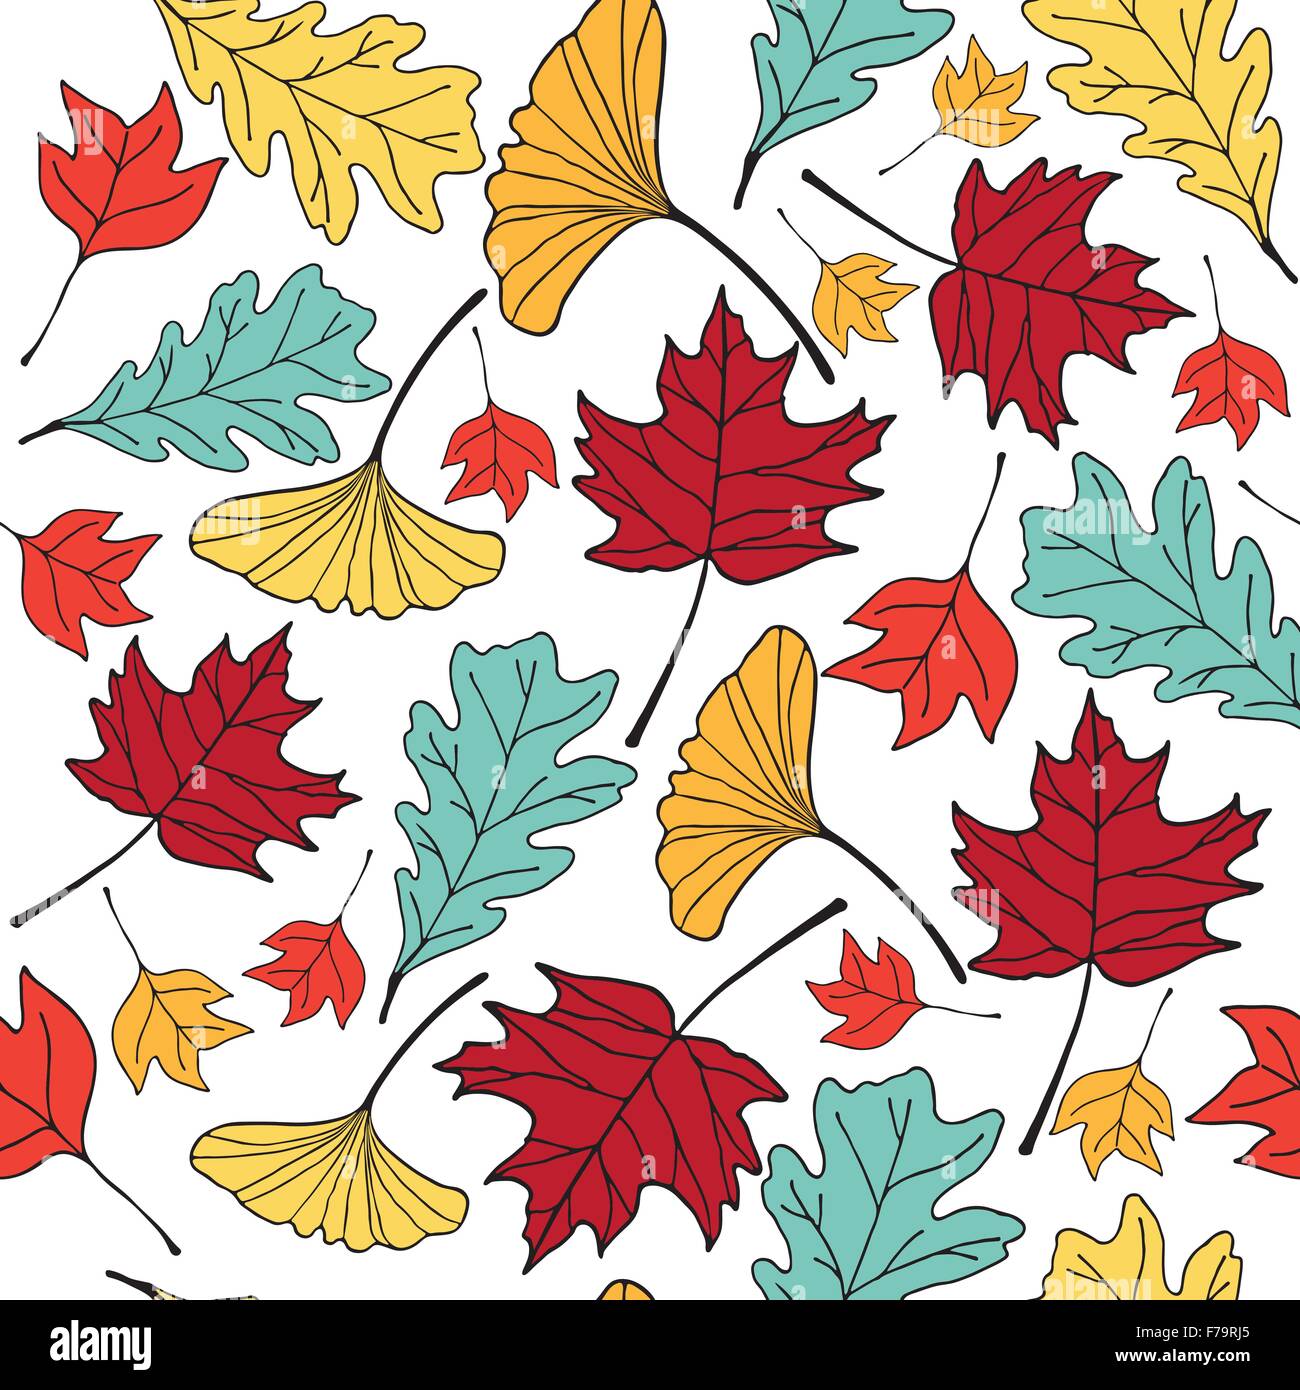 colorful autumn leaf hand drawn doodle illustration pattern seemless white background Stock Vector